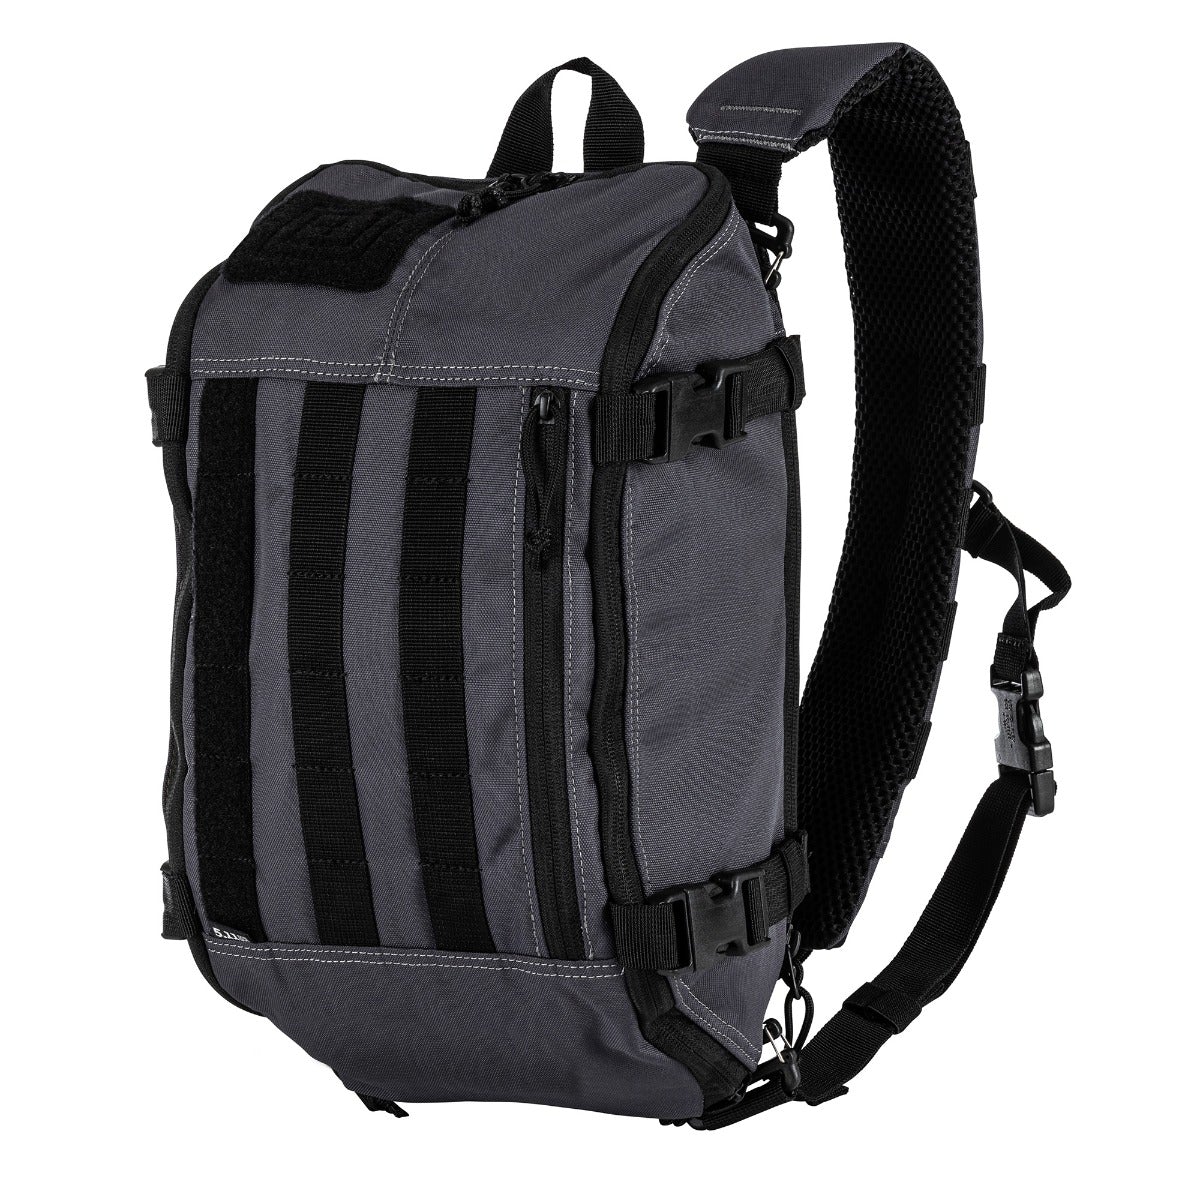 5.11 Tactical Rapid Sling Pack 10L Bags, Packs and Cases 5.11 Tactical Coal Tactical Gear Supplier Tactical Distributors Australia